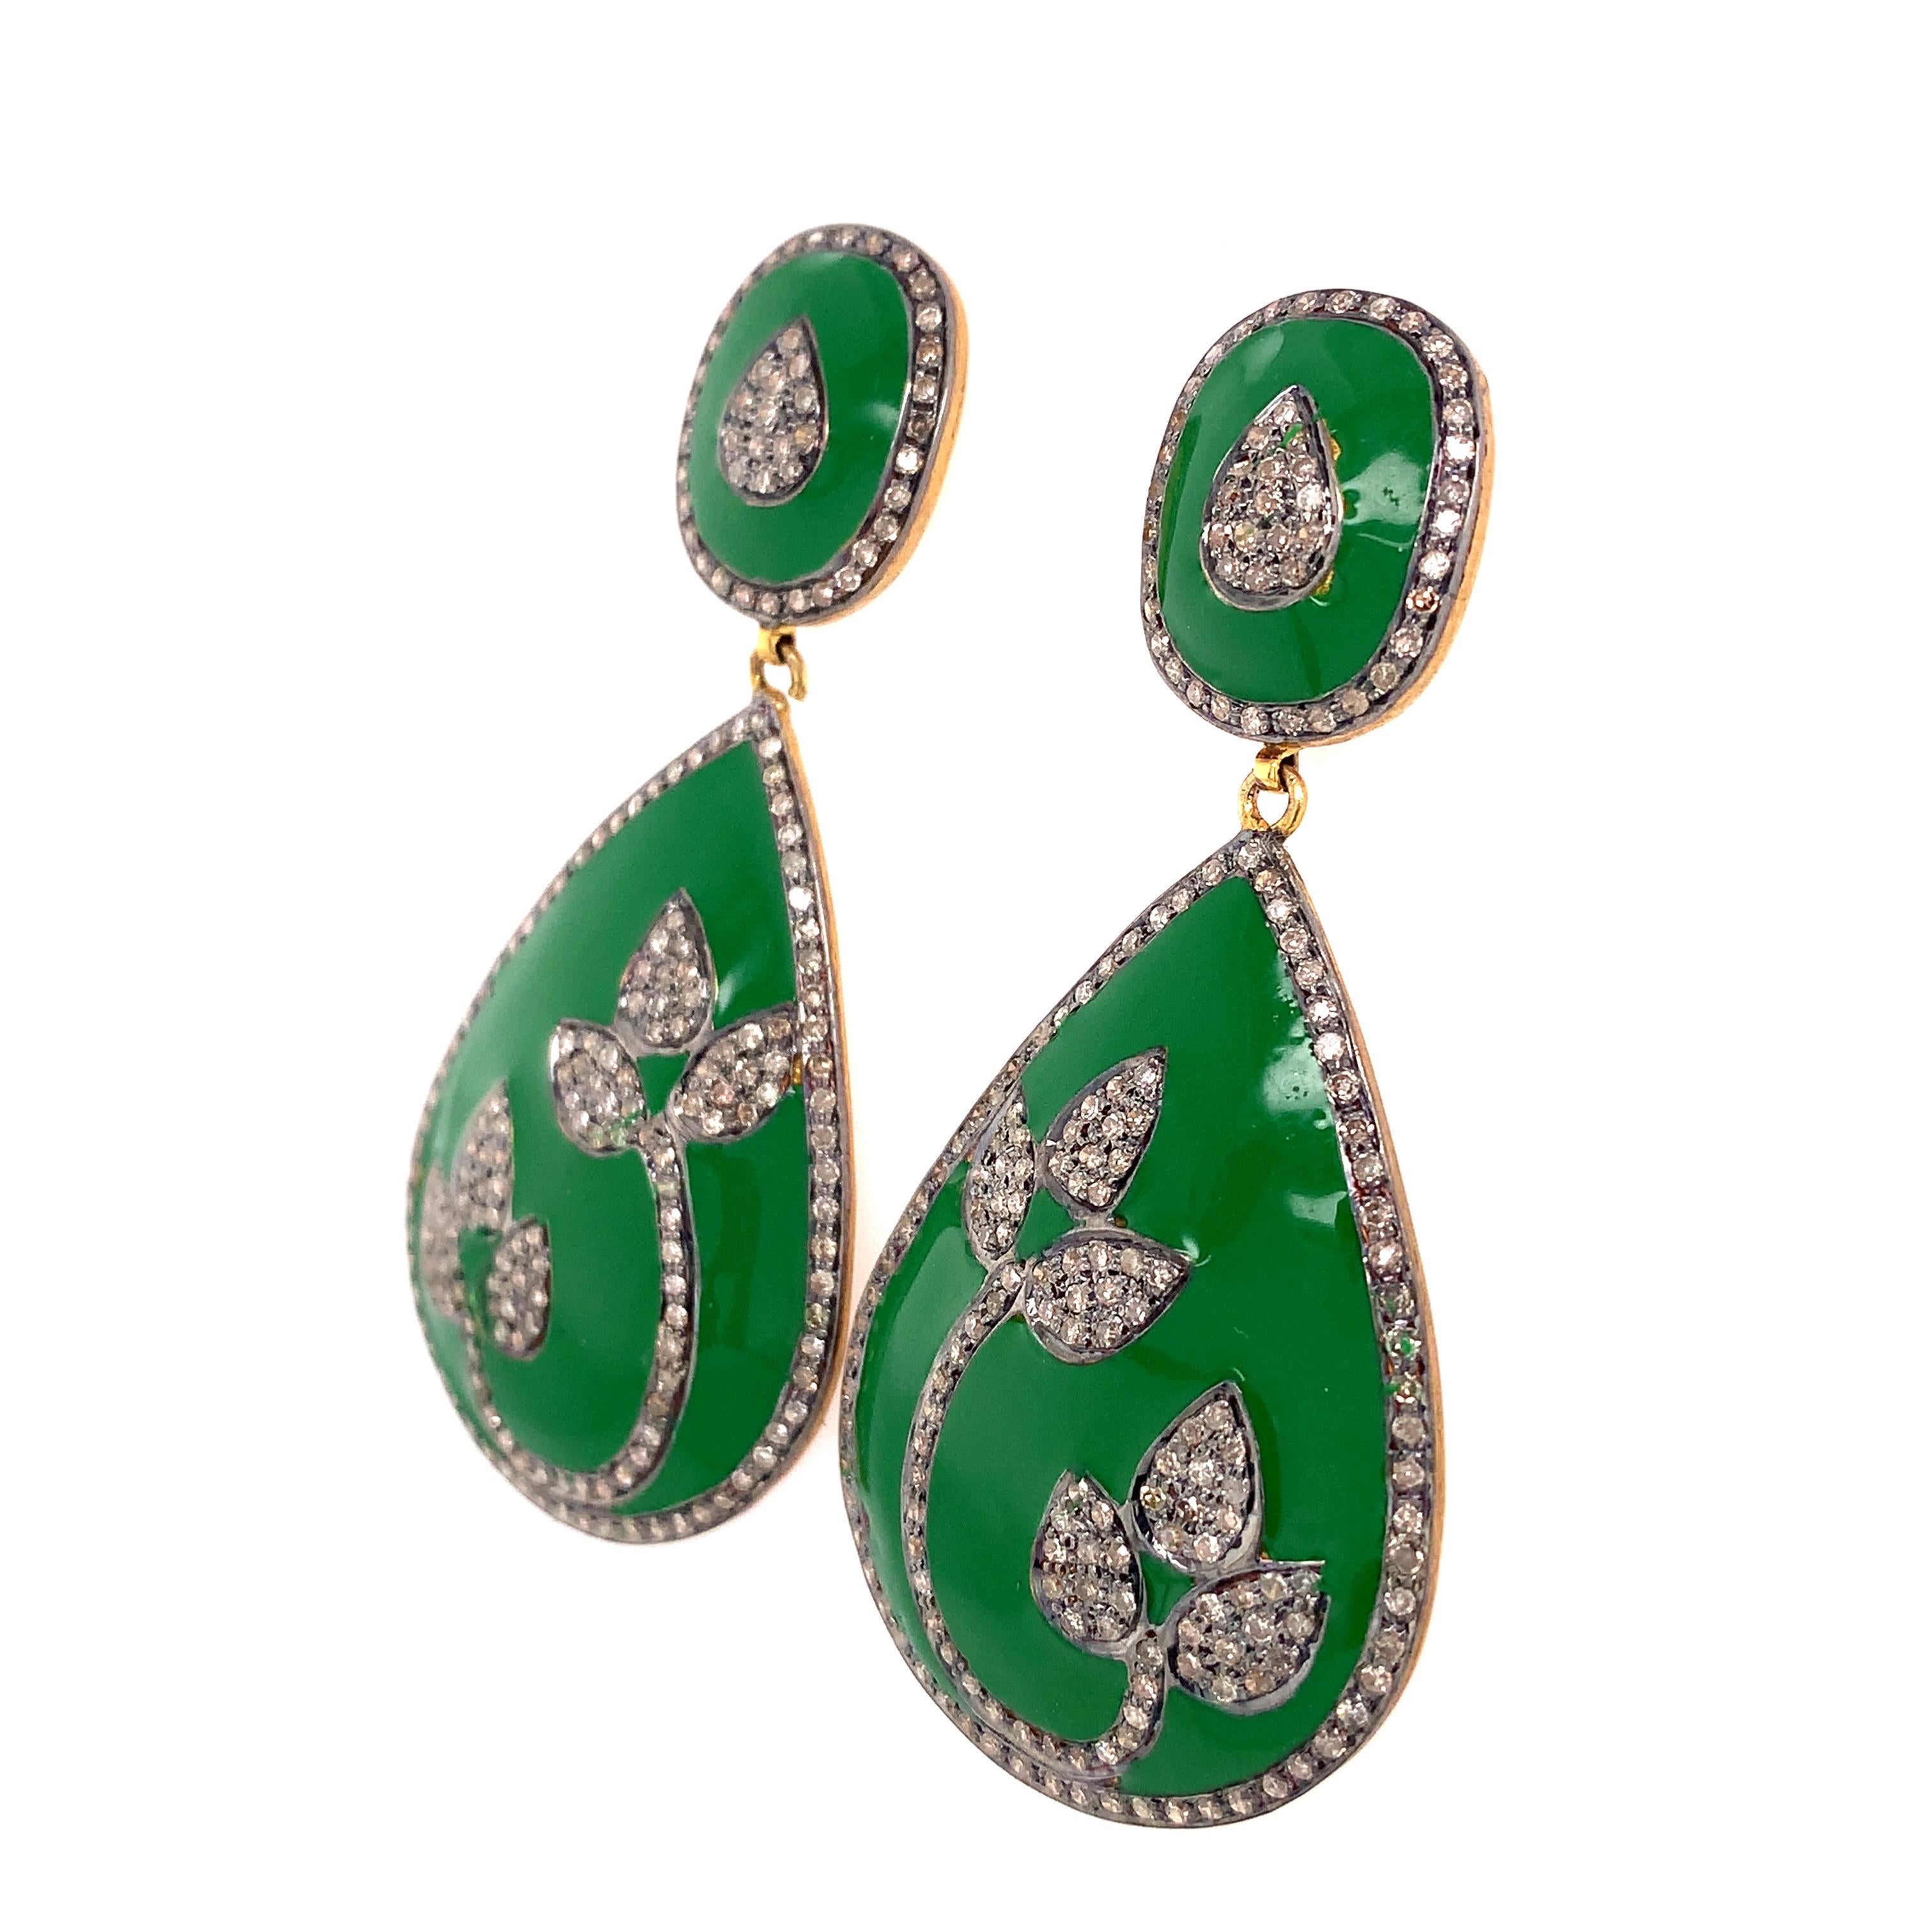 Rustic Collection

Perfect contrast in these green Enamel and rustic Diamond pear shaped earrings with leaf motif set in sterling silver and 14K gold plating.

Diamond: 2.30ct total weight.
